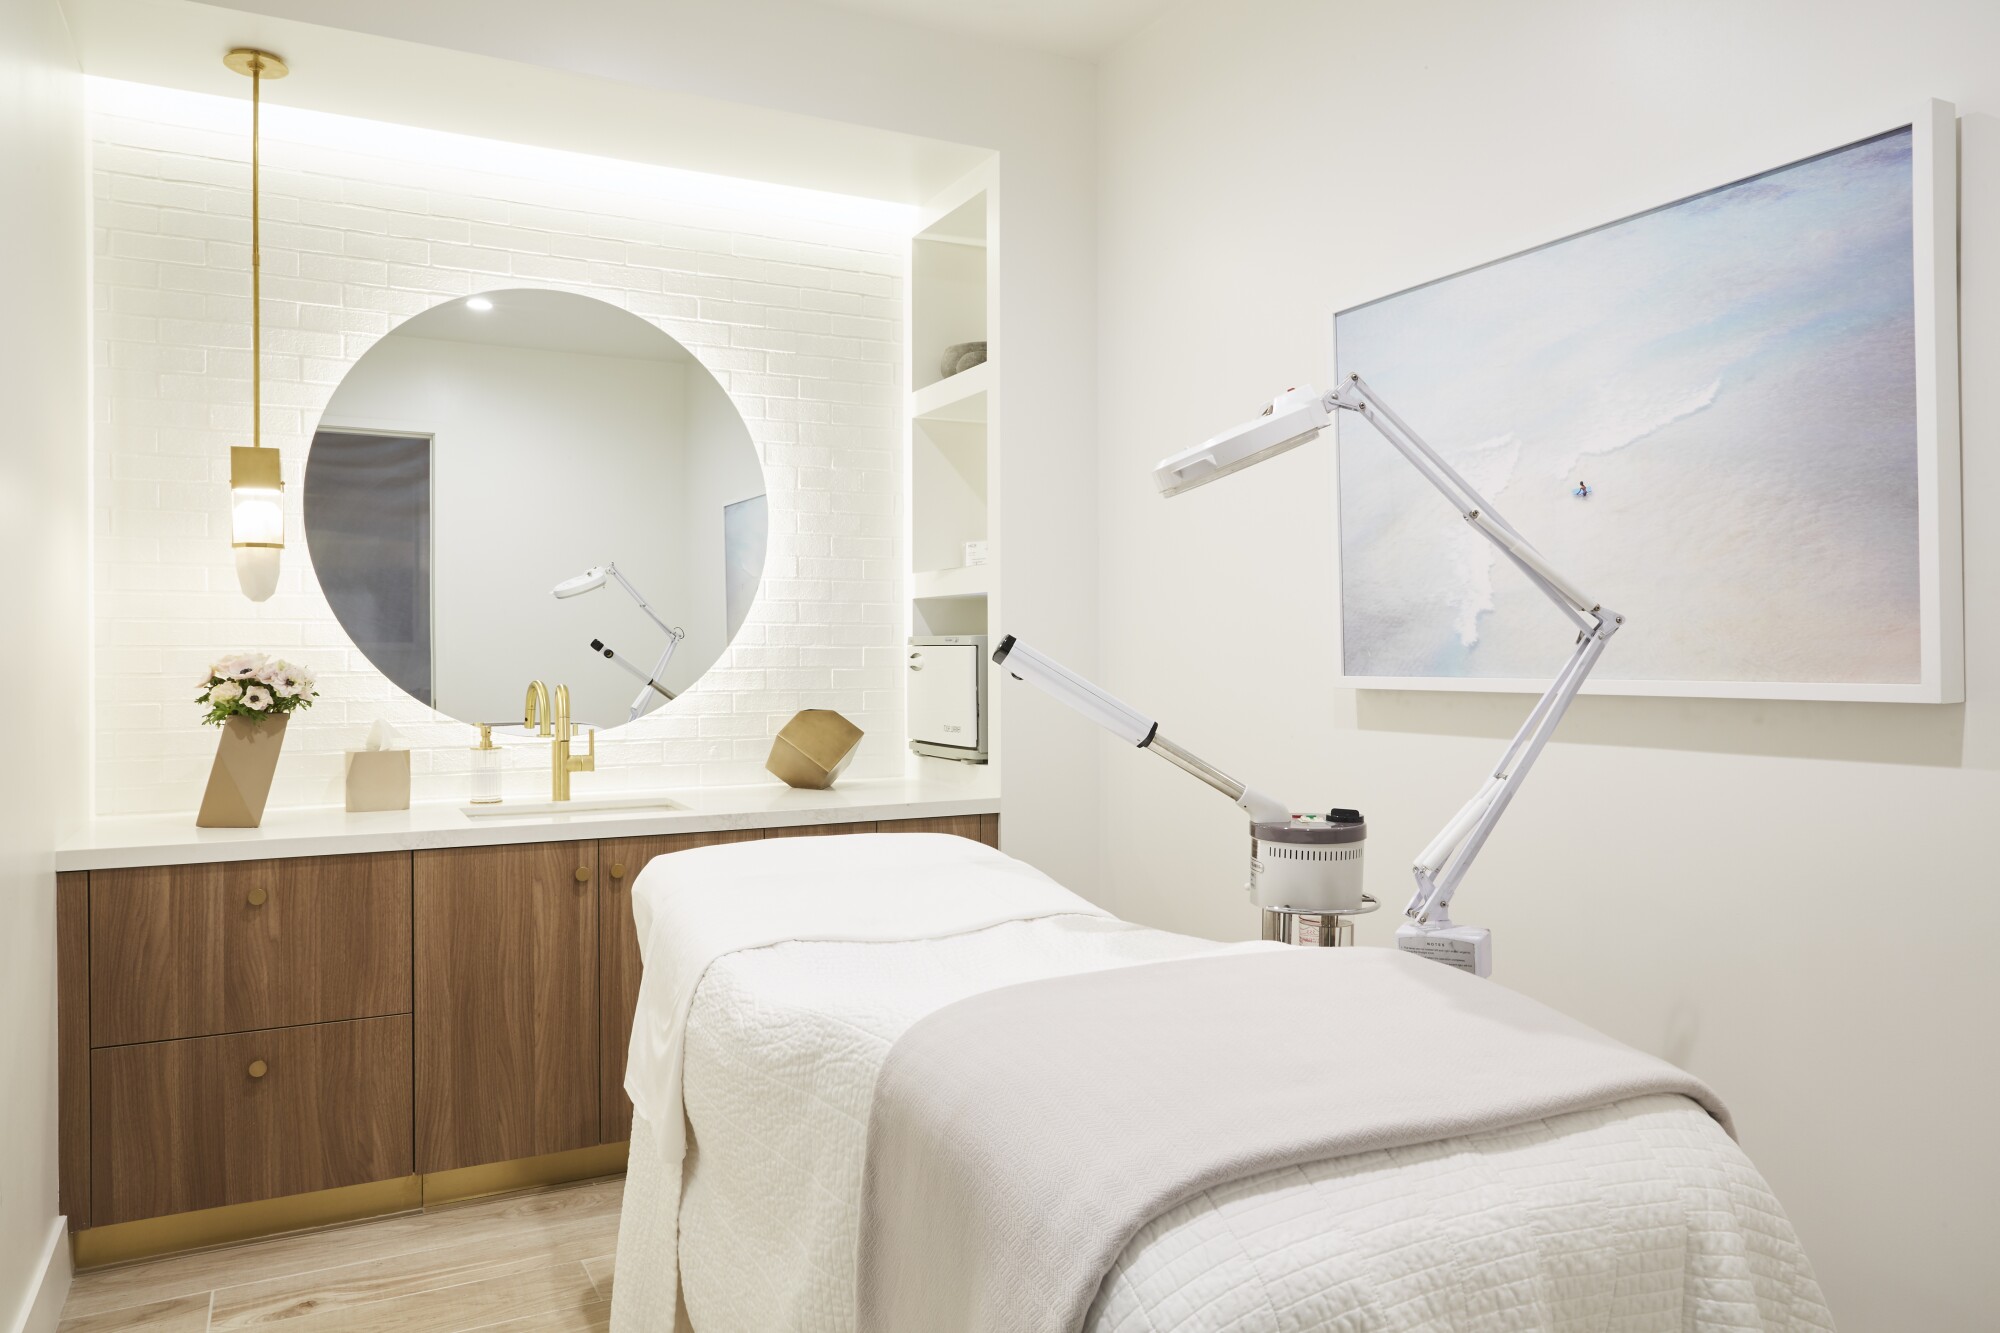 A treatment bed in a white, brightly lit room at a spa